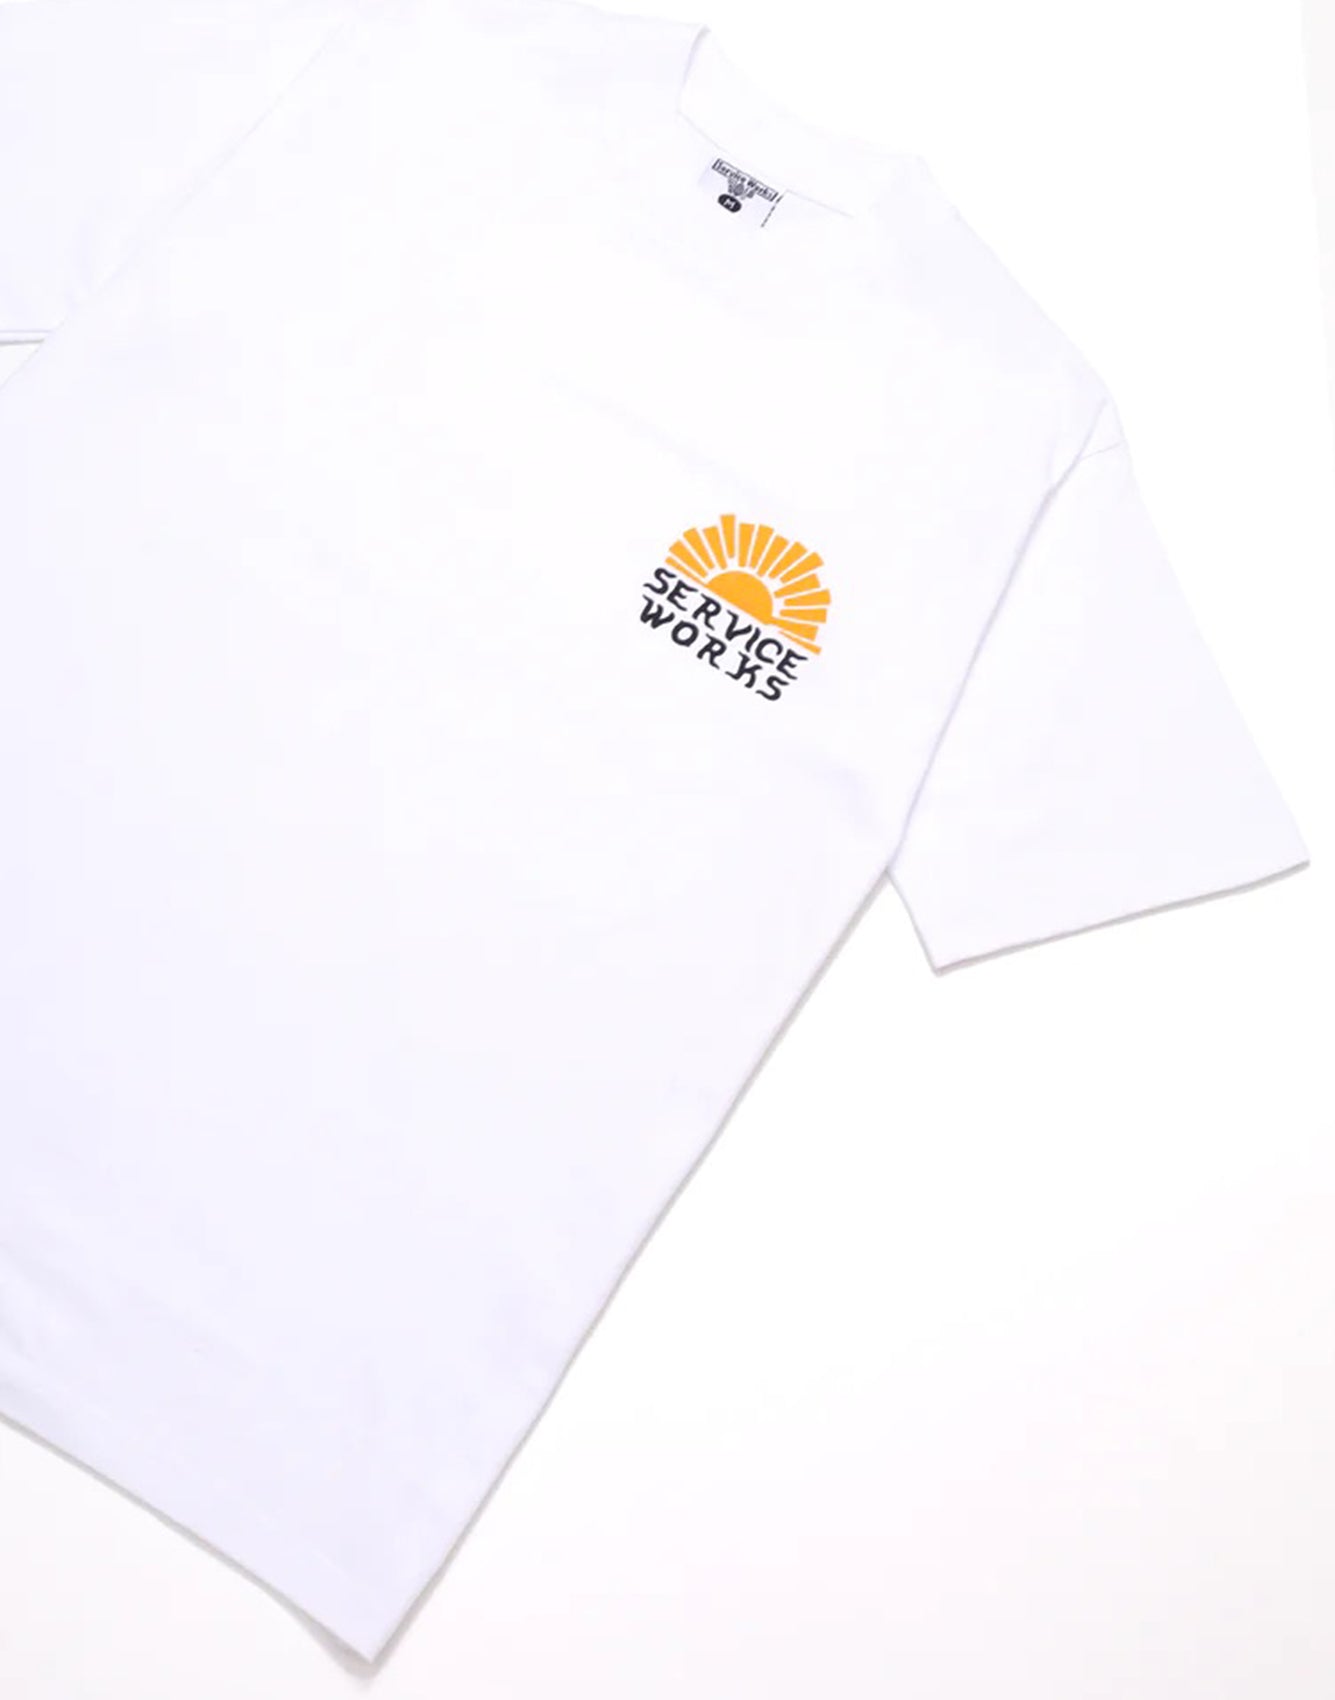 Service Works Sunny Side Up Tee - White